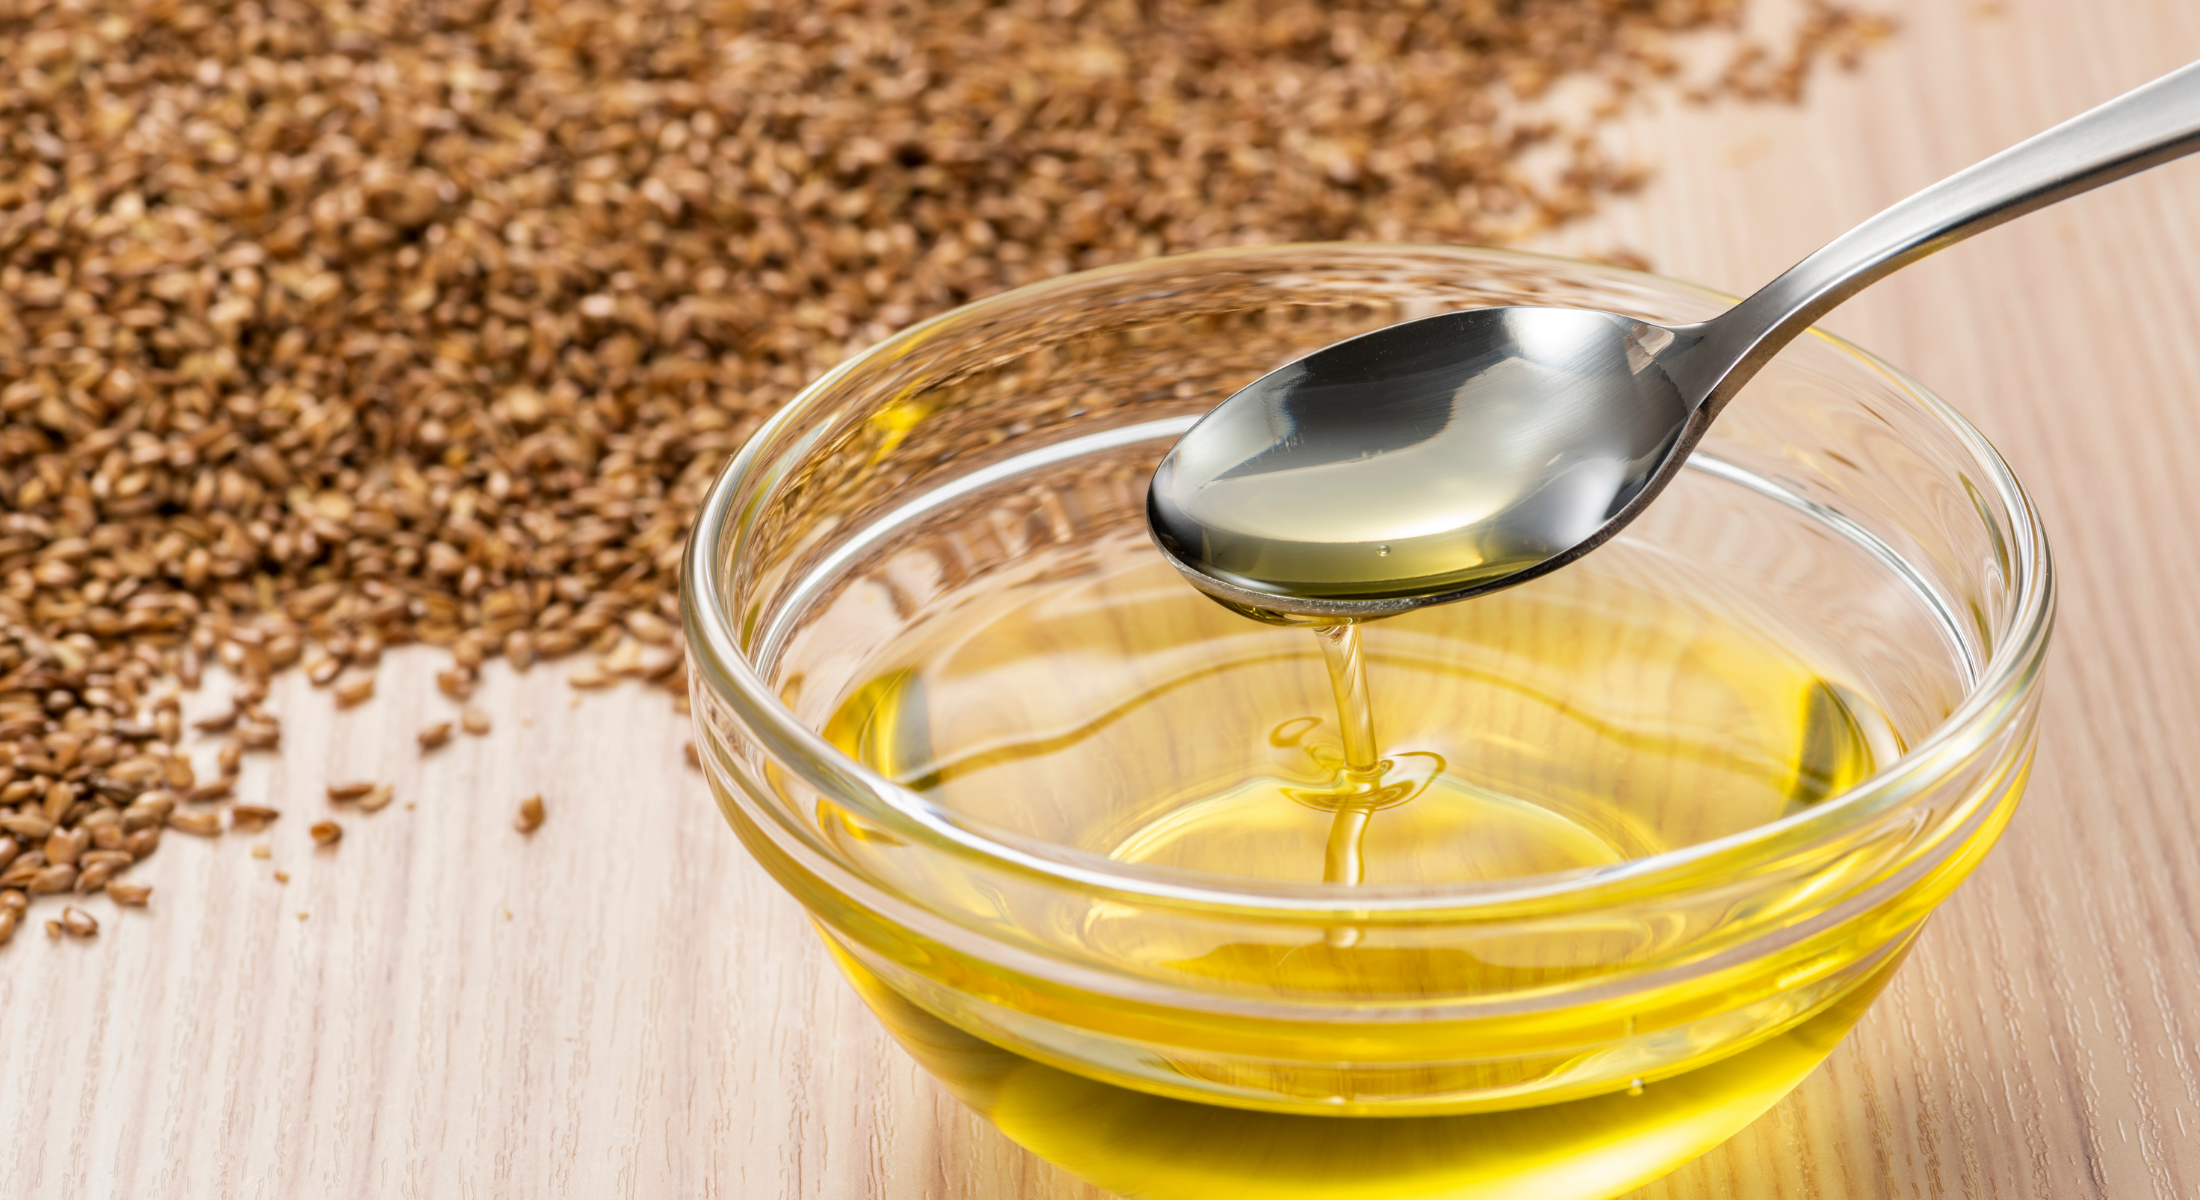 What Is Flaxseed Oil?